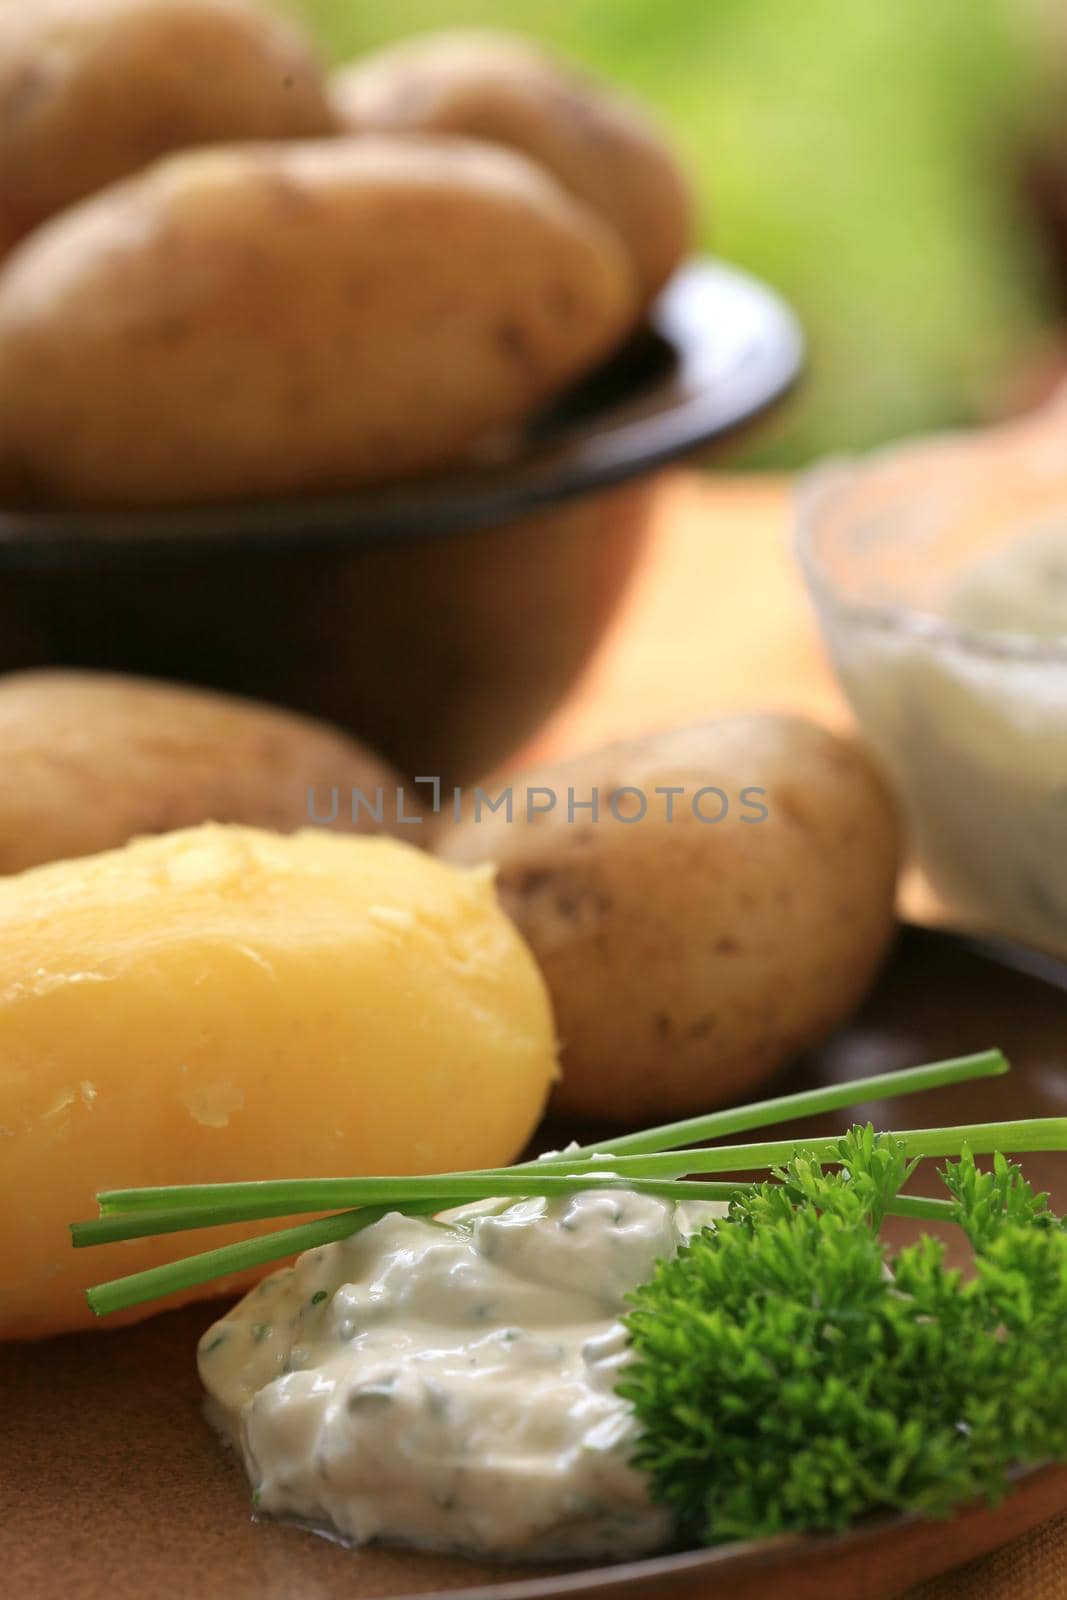 Peeled baked potato with sour cream and herbs by Kasparart